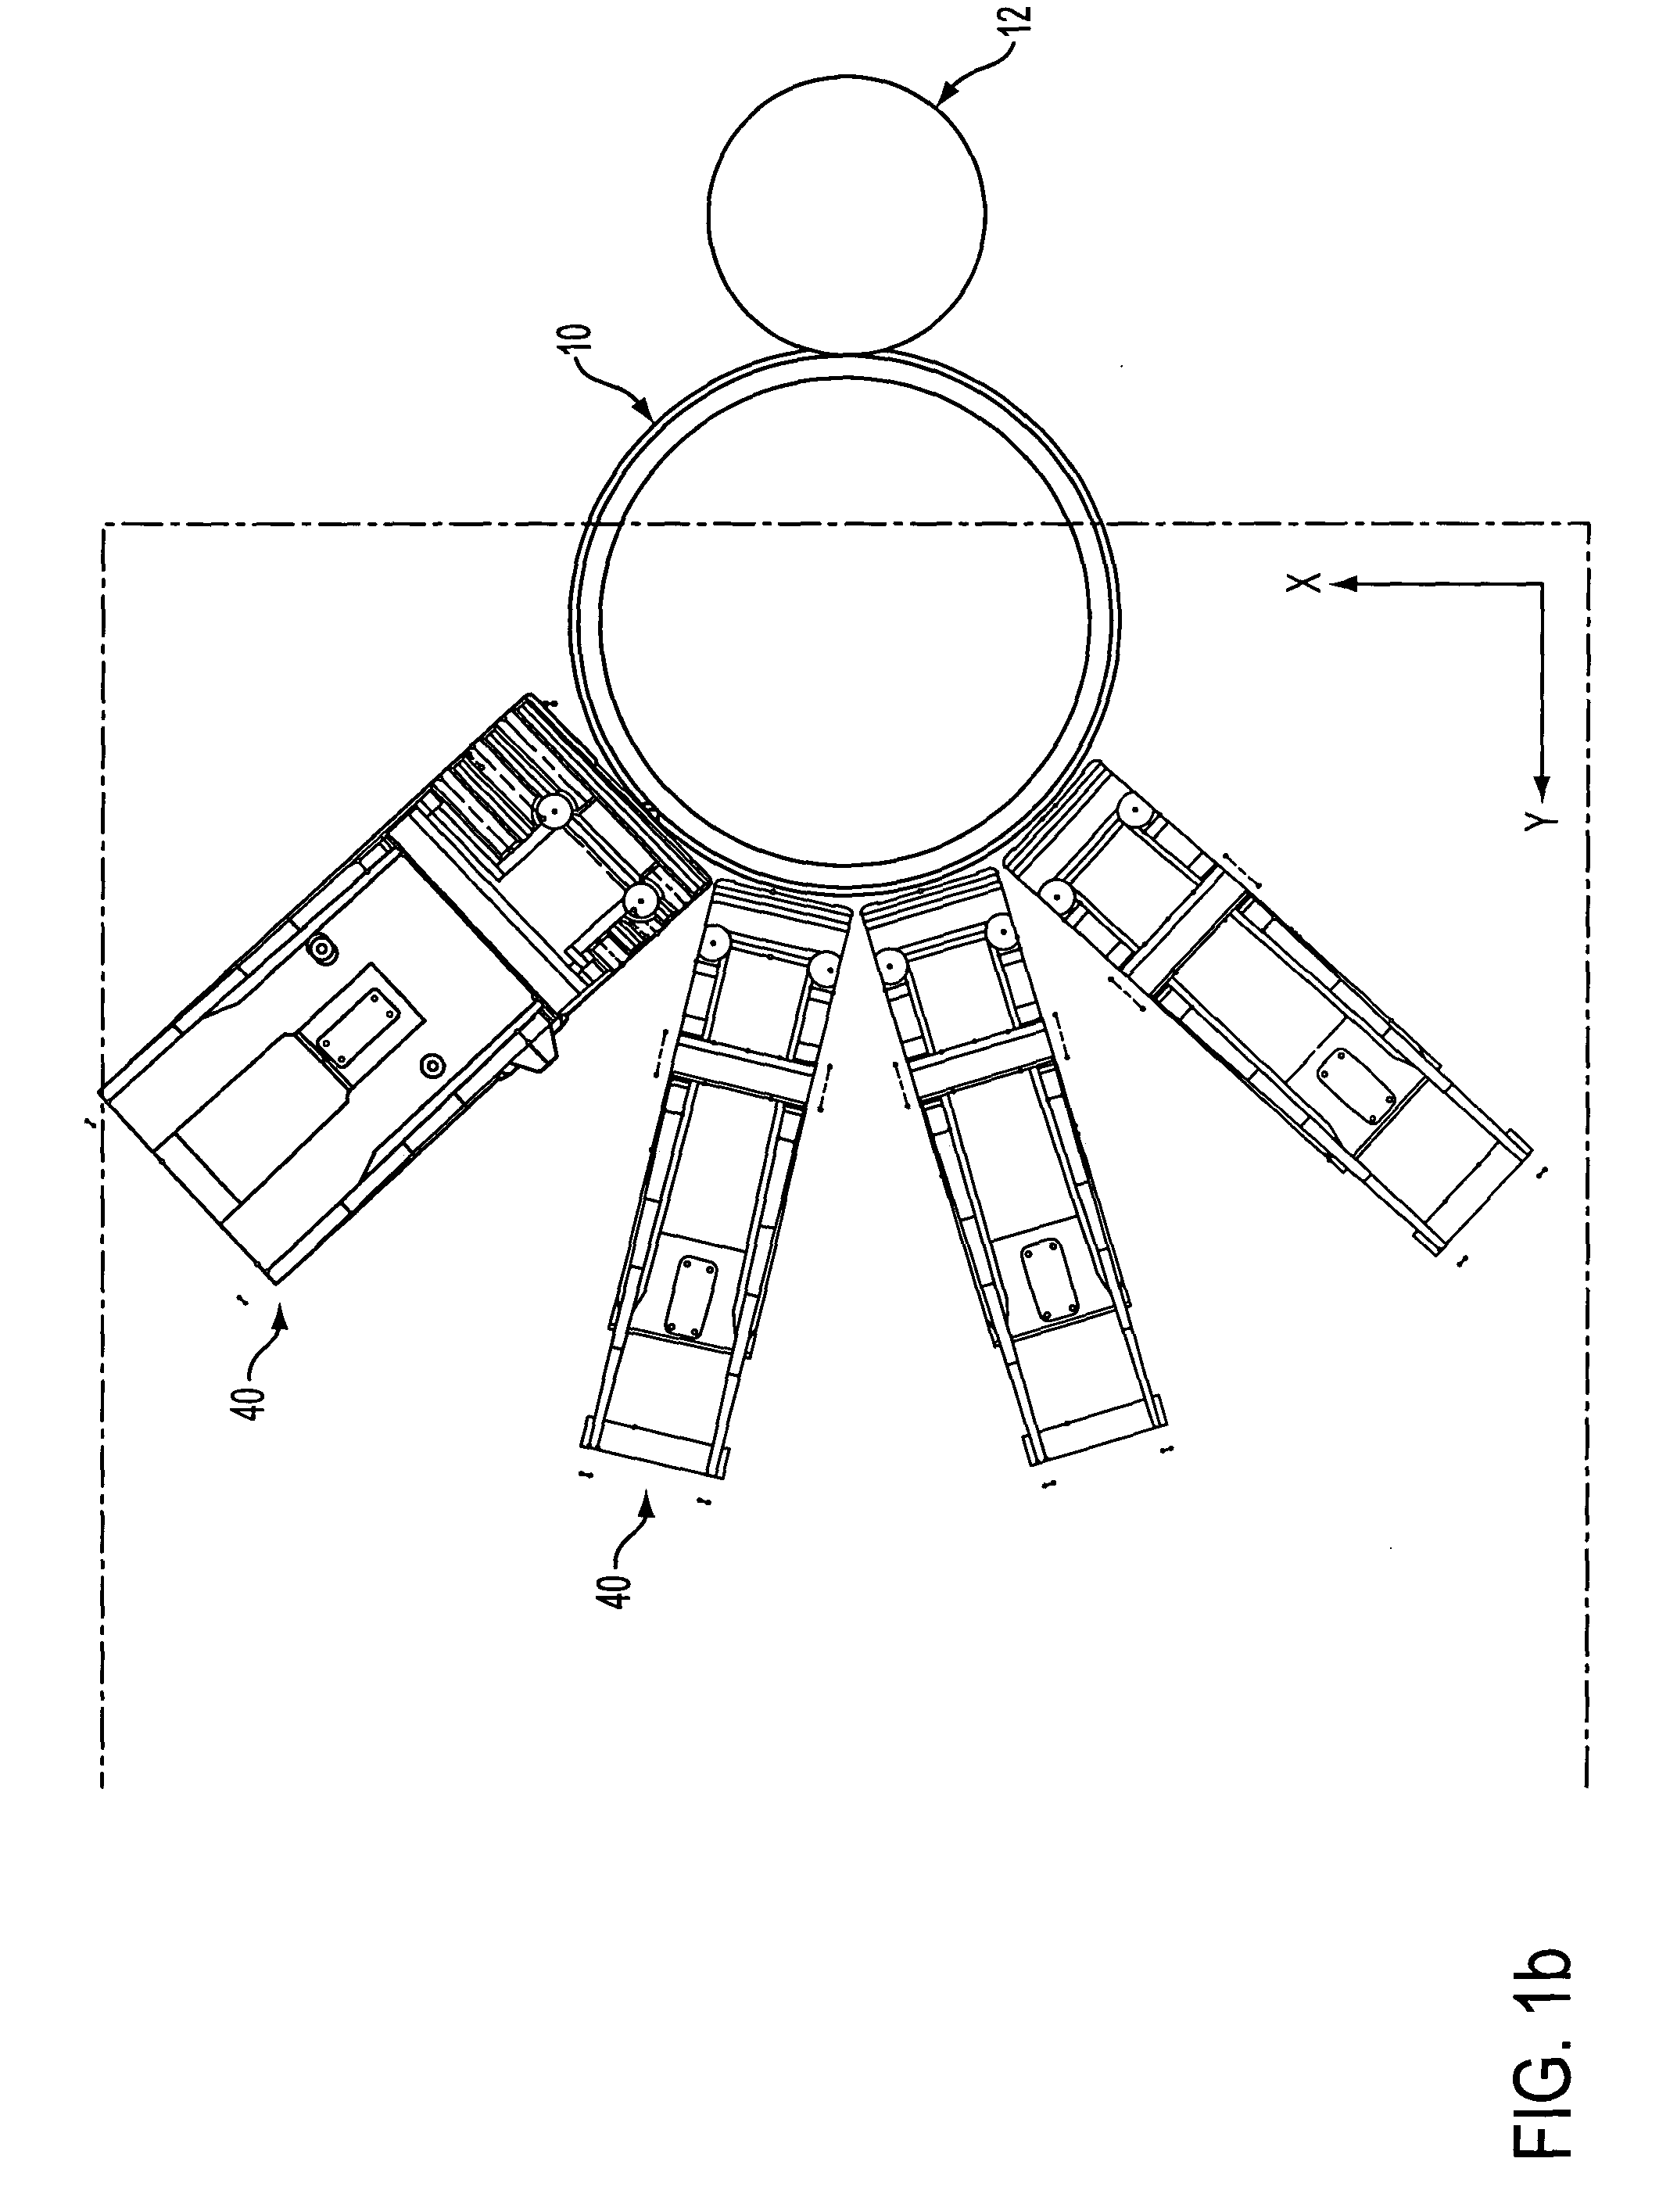 Apparatus and method for ink-jet printing onto an intermediate drum in a helical pattern